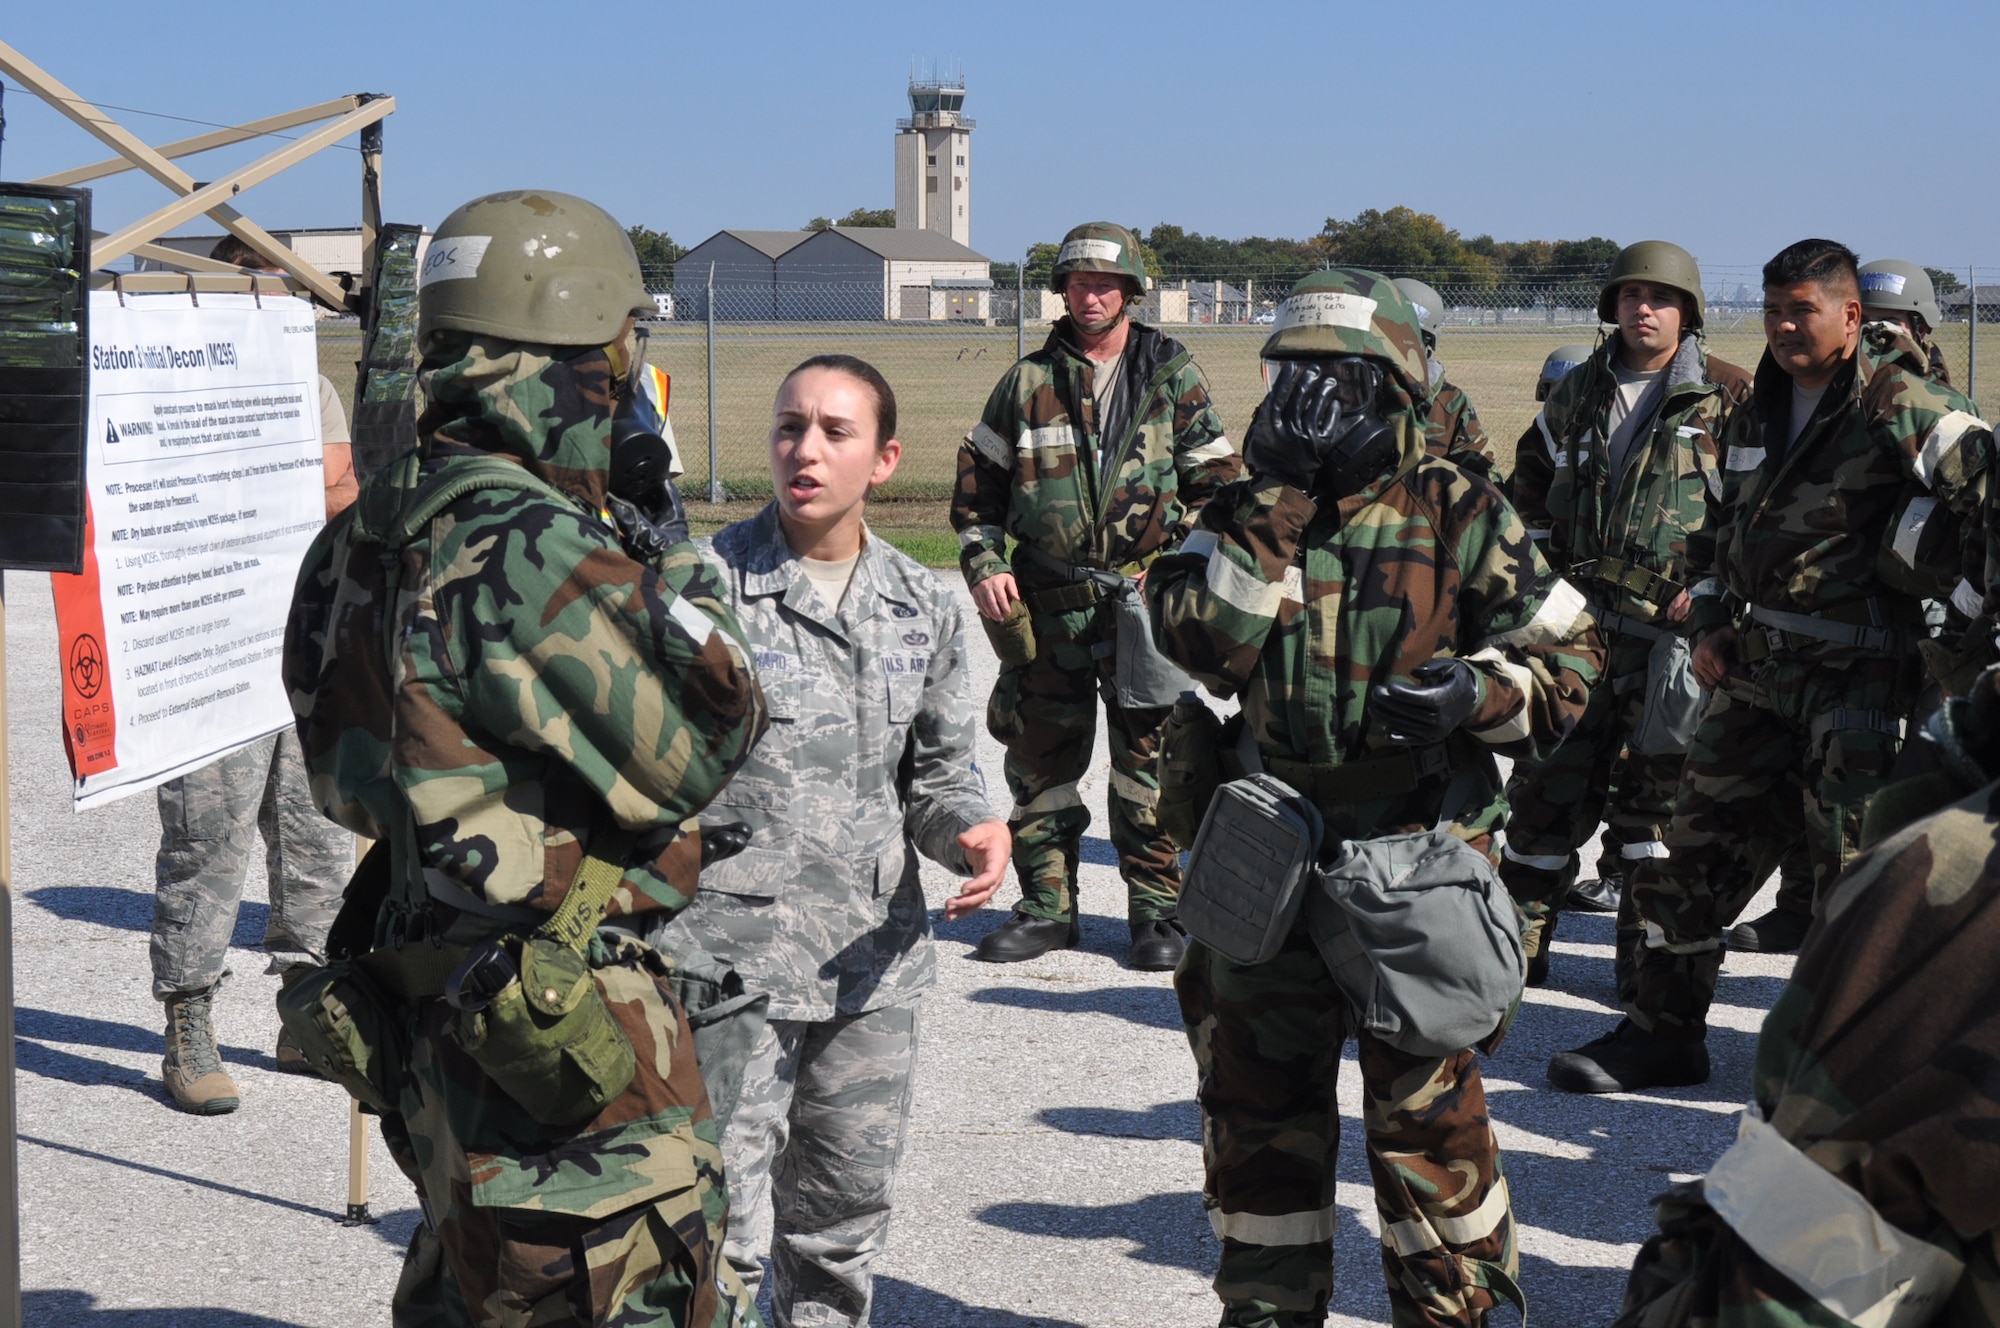 (Center) Senior Master Sgt. Leia Bernhard, 733rd Training Squadron first sergeant, provides guidance and training on how to properly go through the decontamination zone during an Ability to Survive and Operate training exercise on Joint Base San Antonio-Lackland, Texas on Nov. 18, 2017. Both ground Reserve Citizen Airmen and air crew members participated in the exercise and were required to go through a decontamination zone to prevent the spread of any potential chemicals spreading. (U.S. Air Force photo/Senior Airman Bryan Swink)